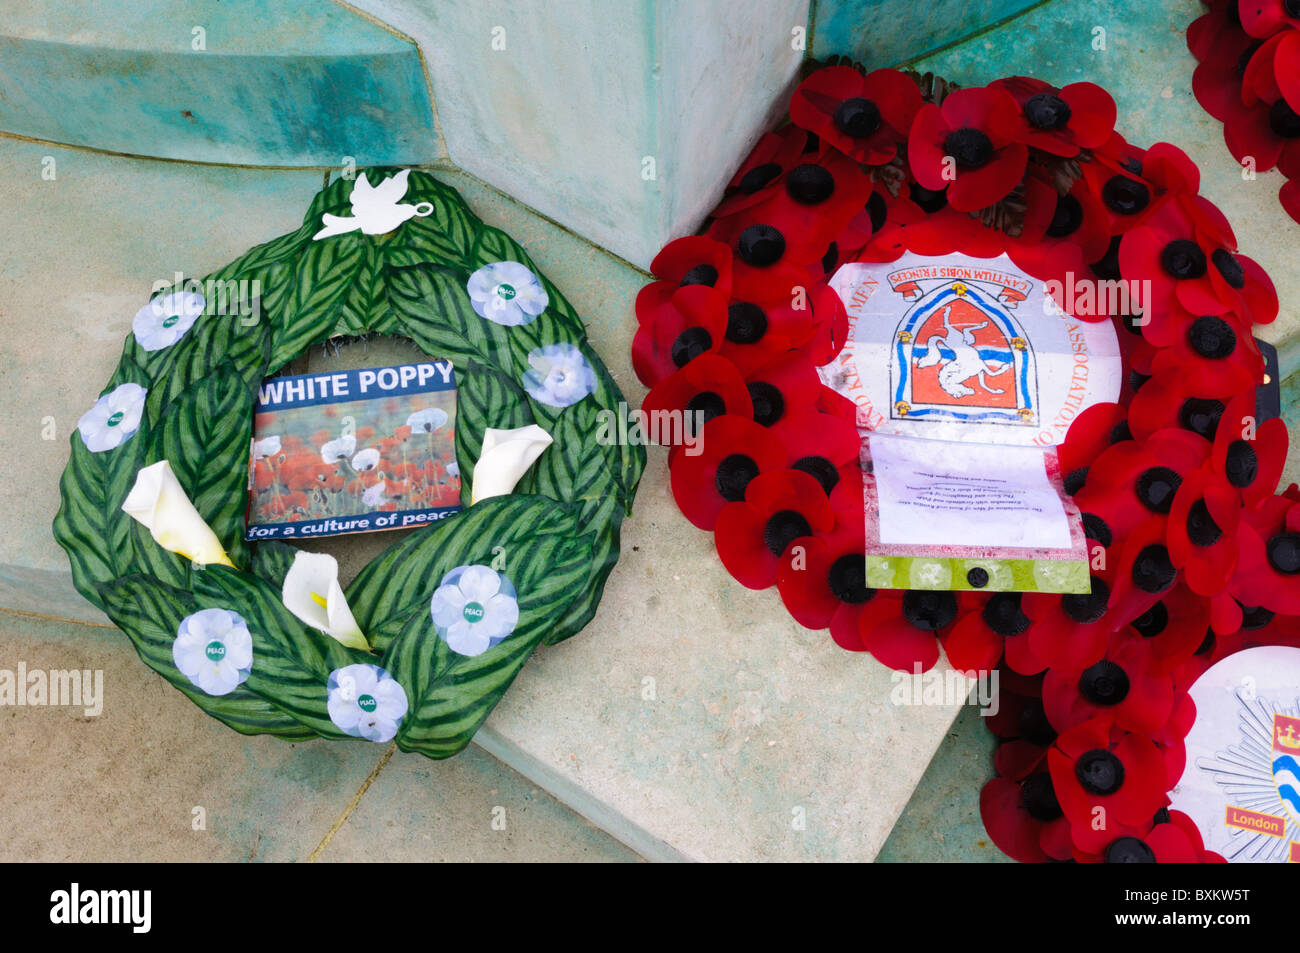 A white poppy wreath next to a conventional red poppy wreath Stock Photo